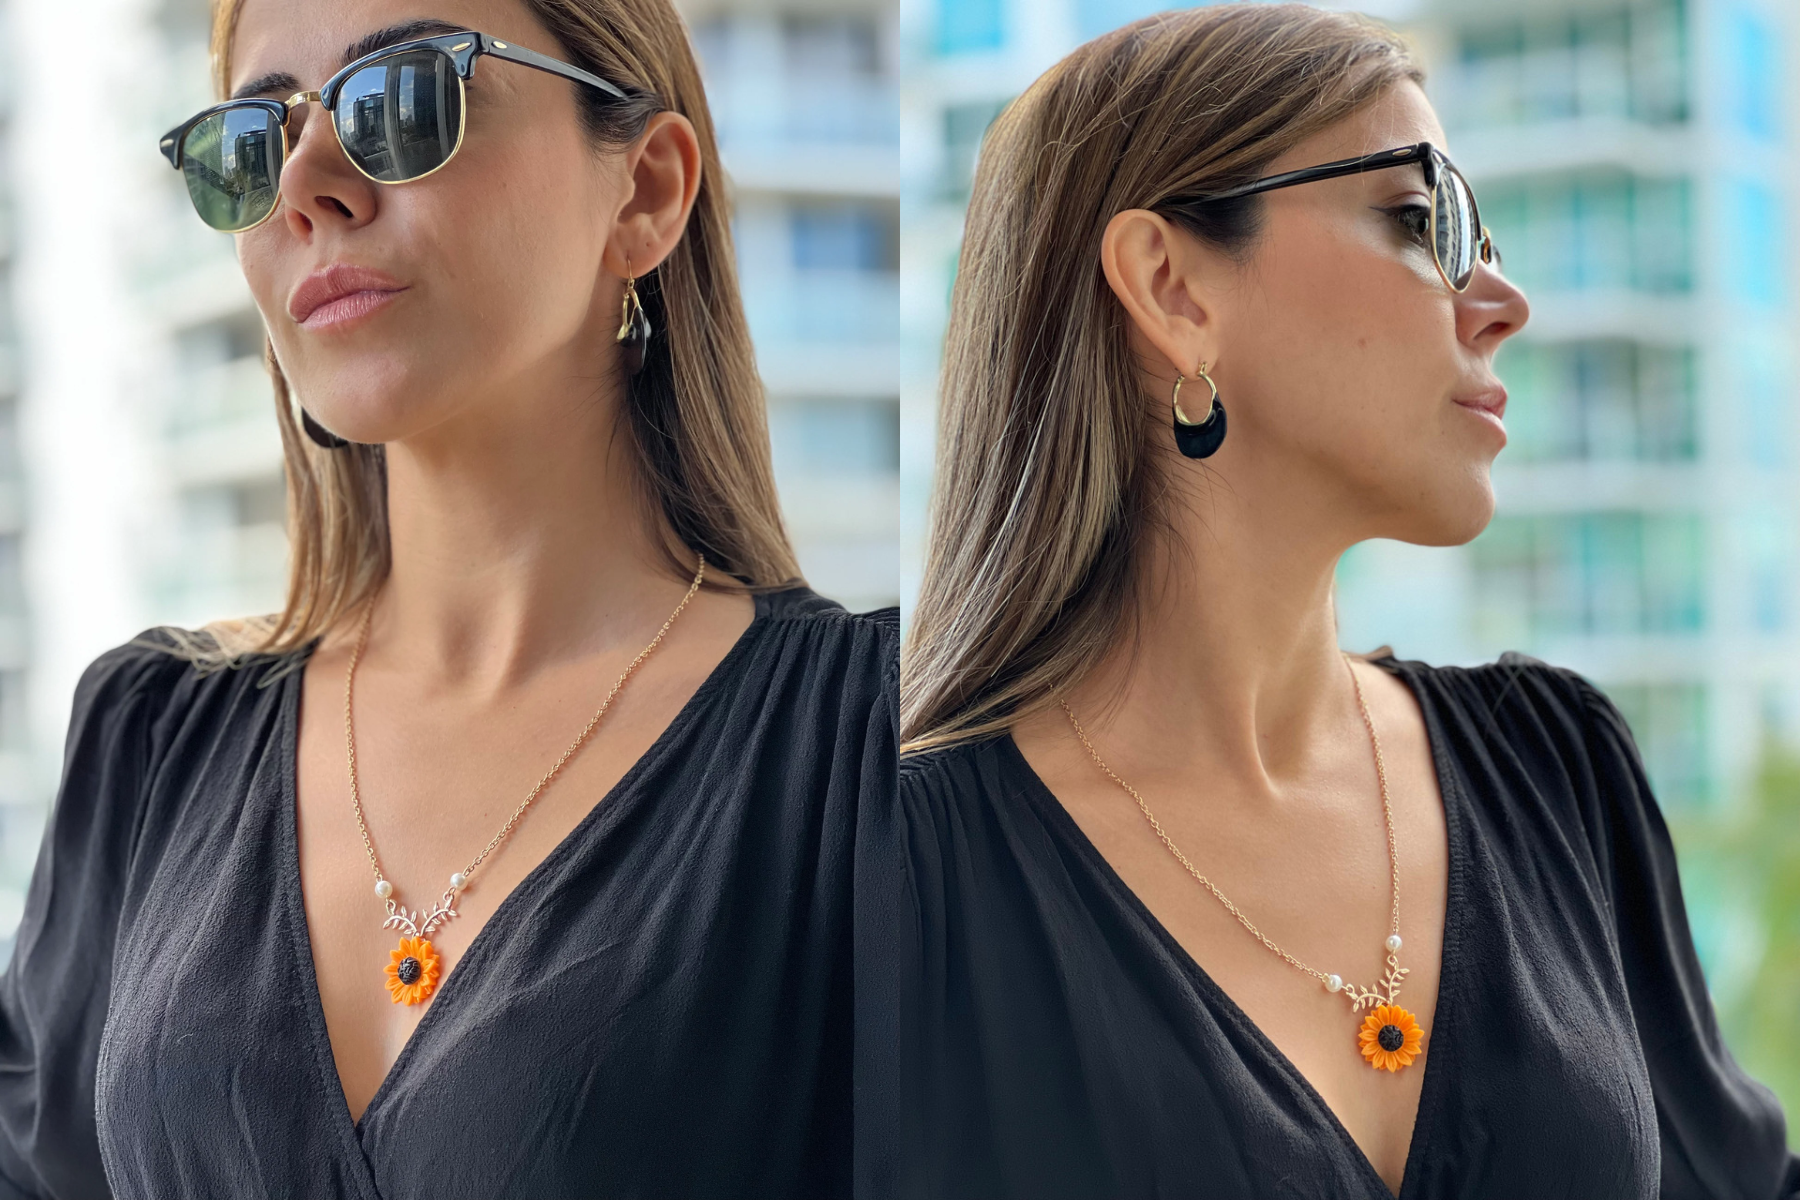 Two images depict a woman wearing a pendant necklace with a sunflower design, posing for the camera